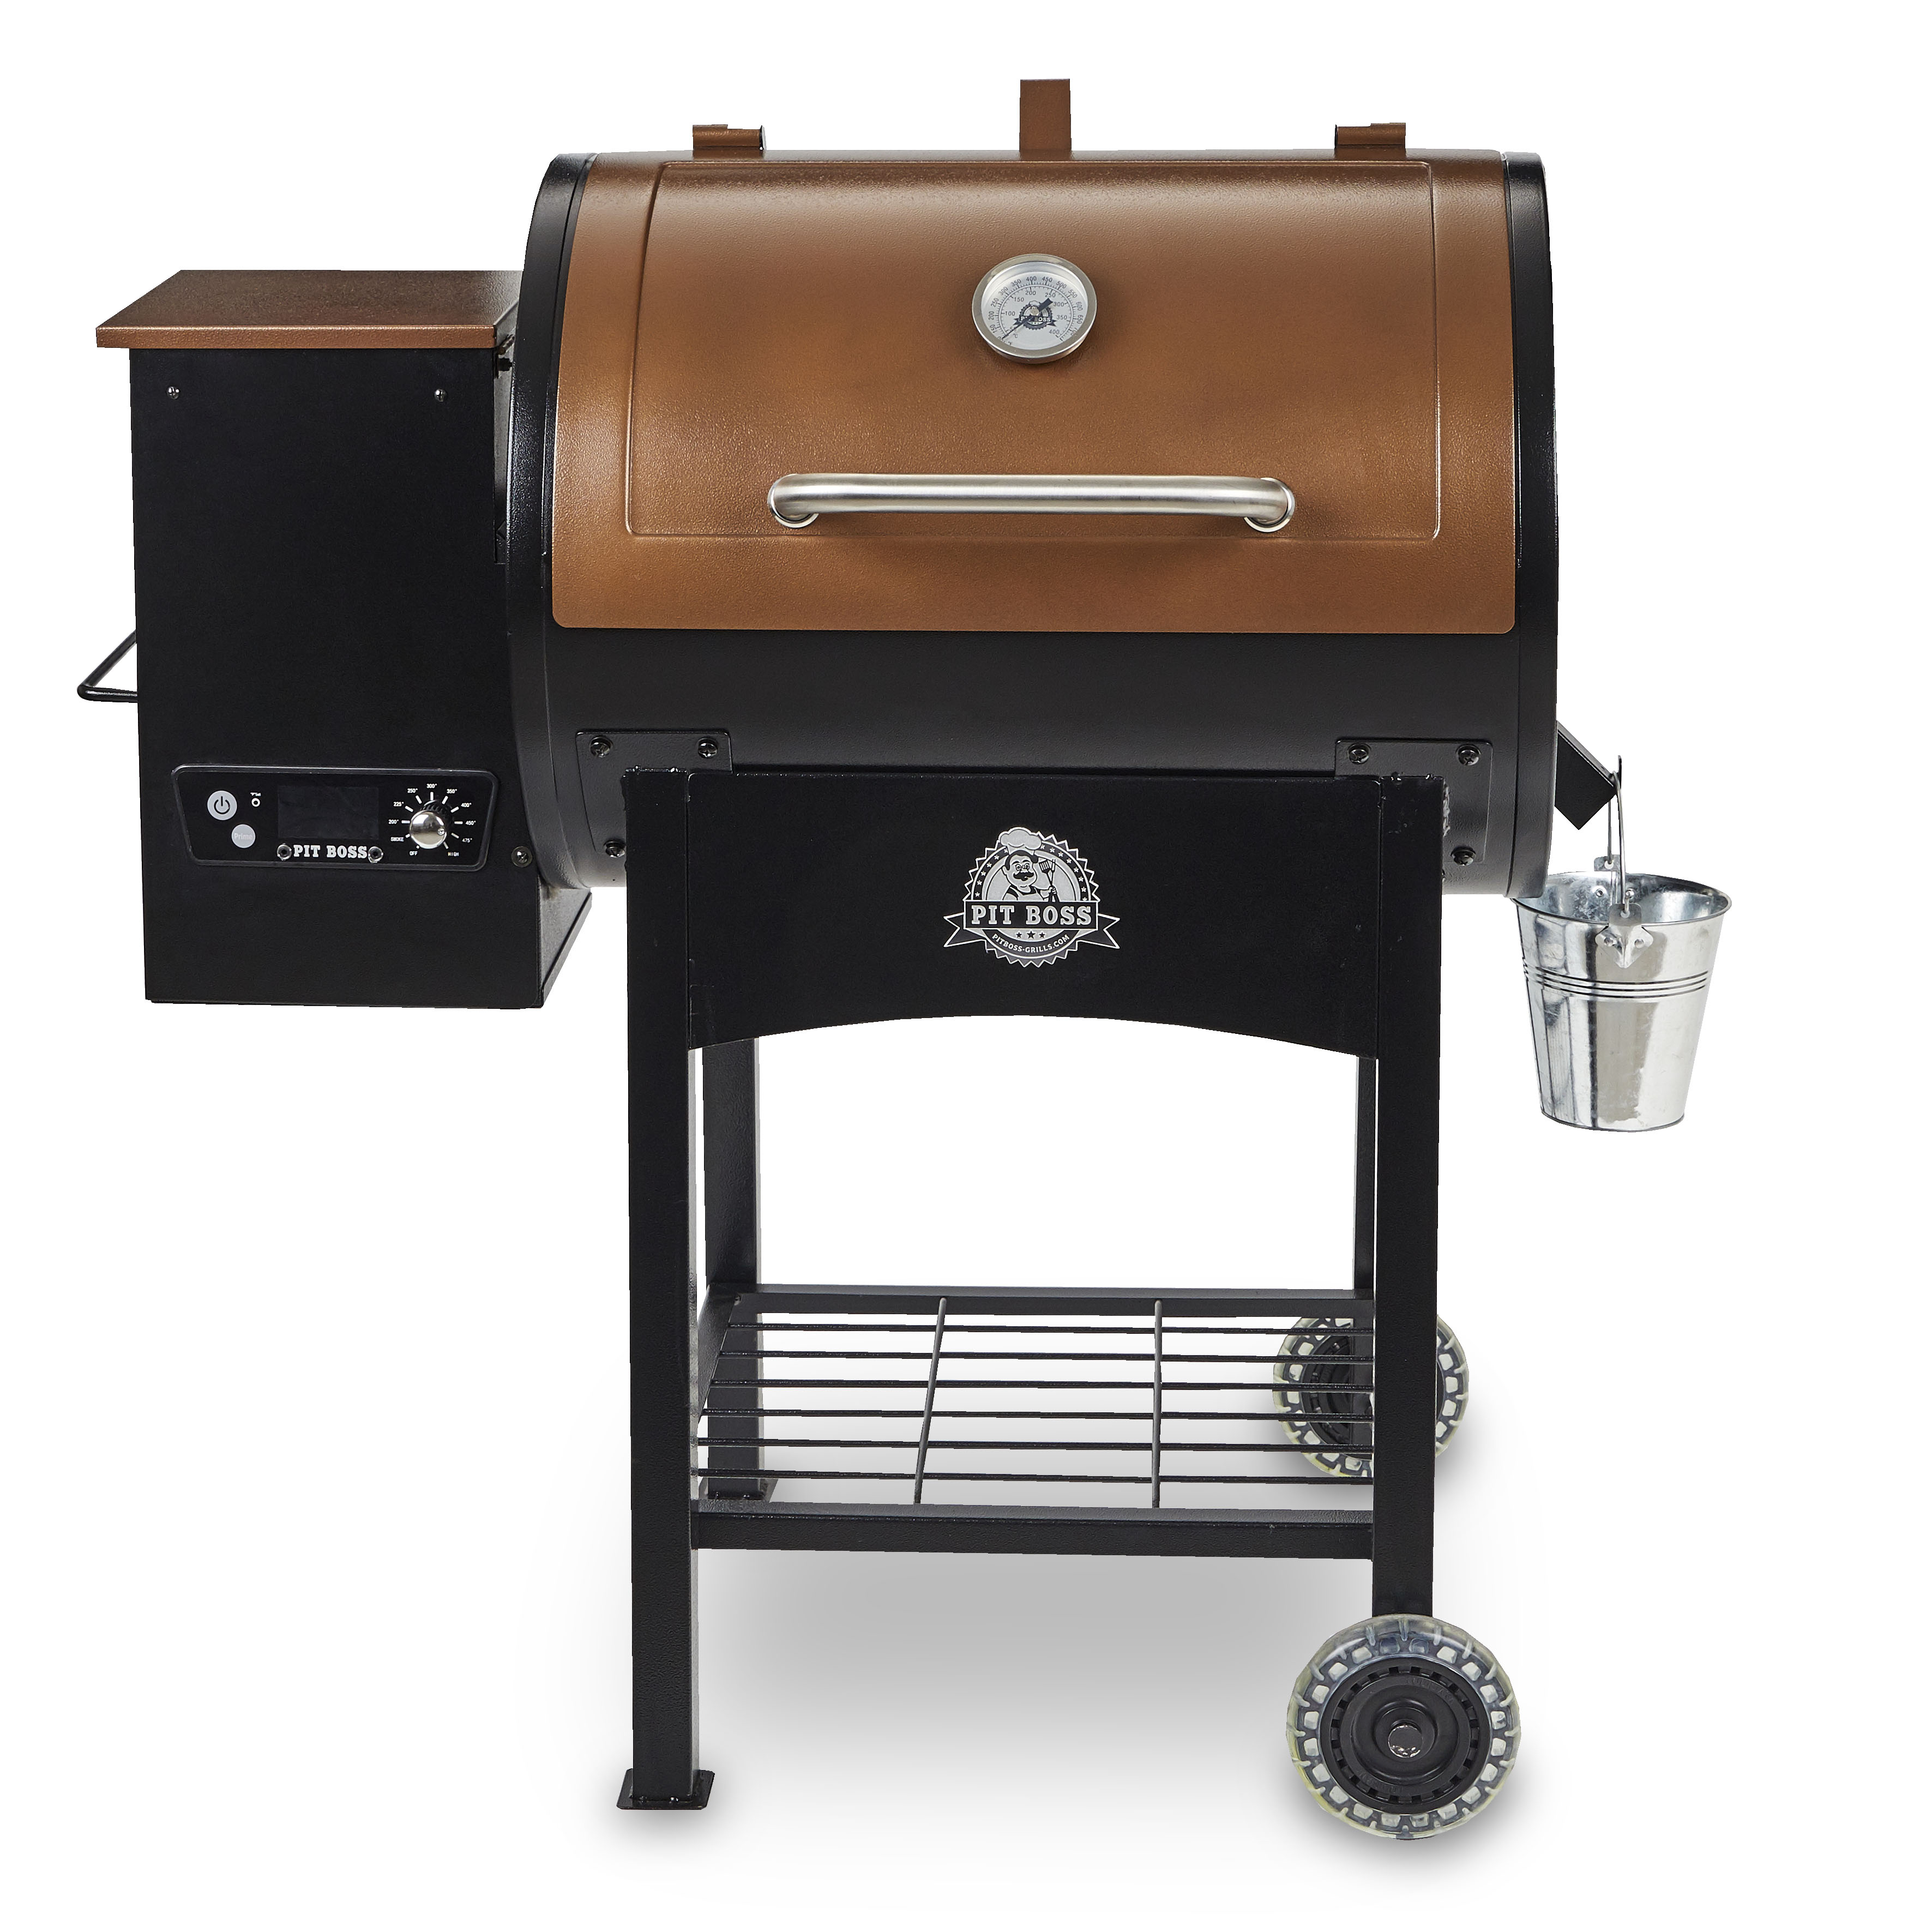 Pit Boss 700 Classic Wood Fired Pellet Grill with Flamebroiler - image 1 of 13